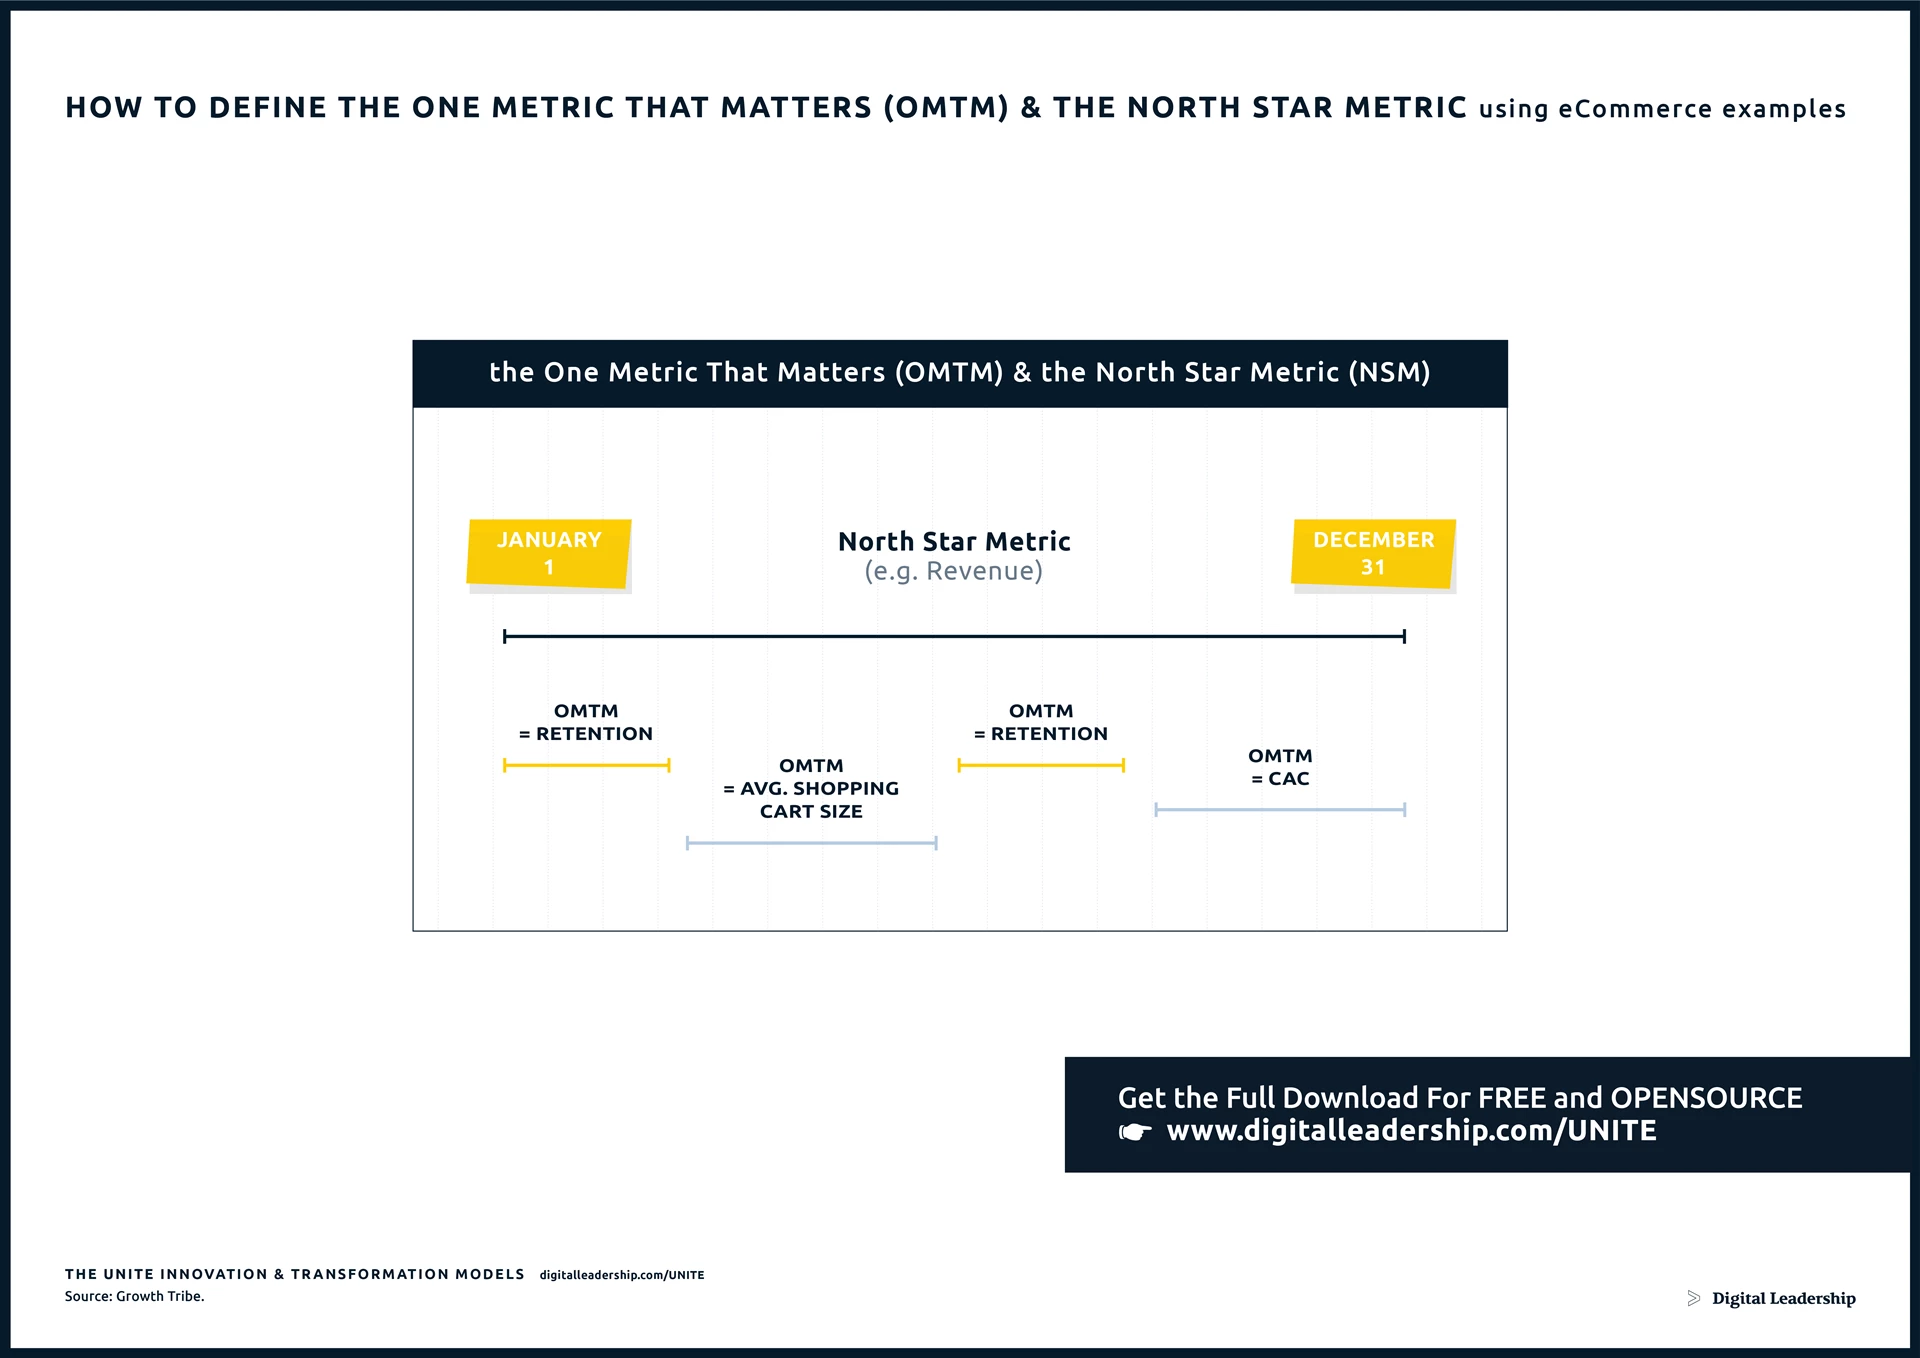 The One Metric that Matters (OMTM) & North Star Metric (NSM)